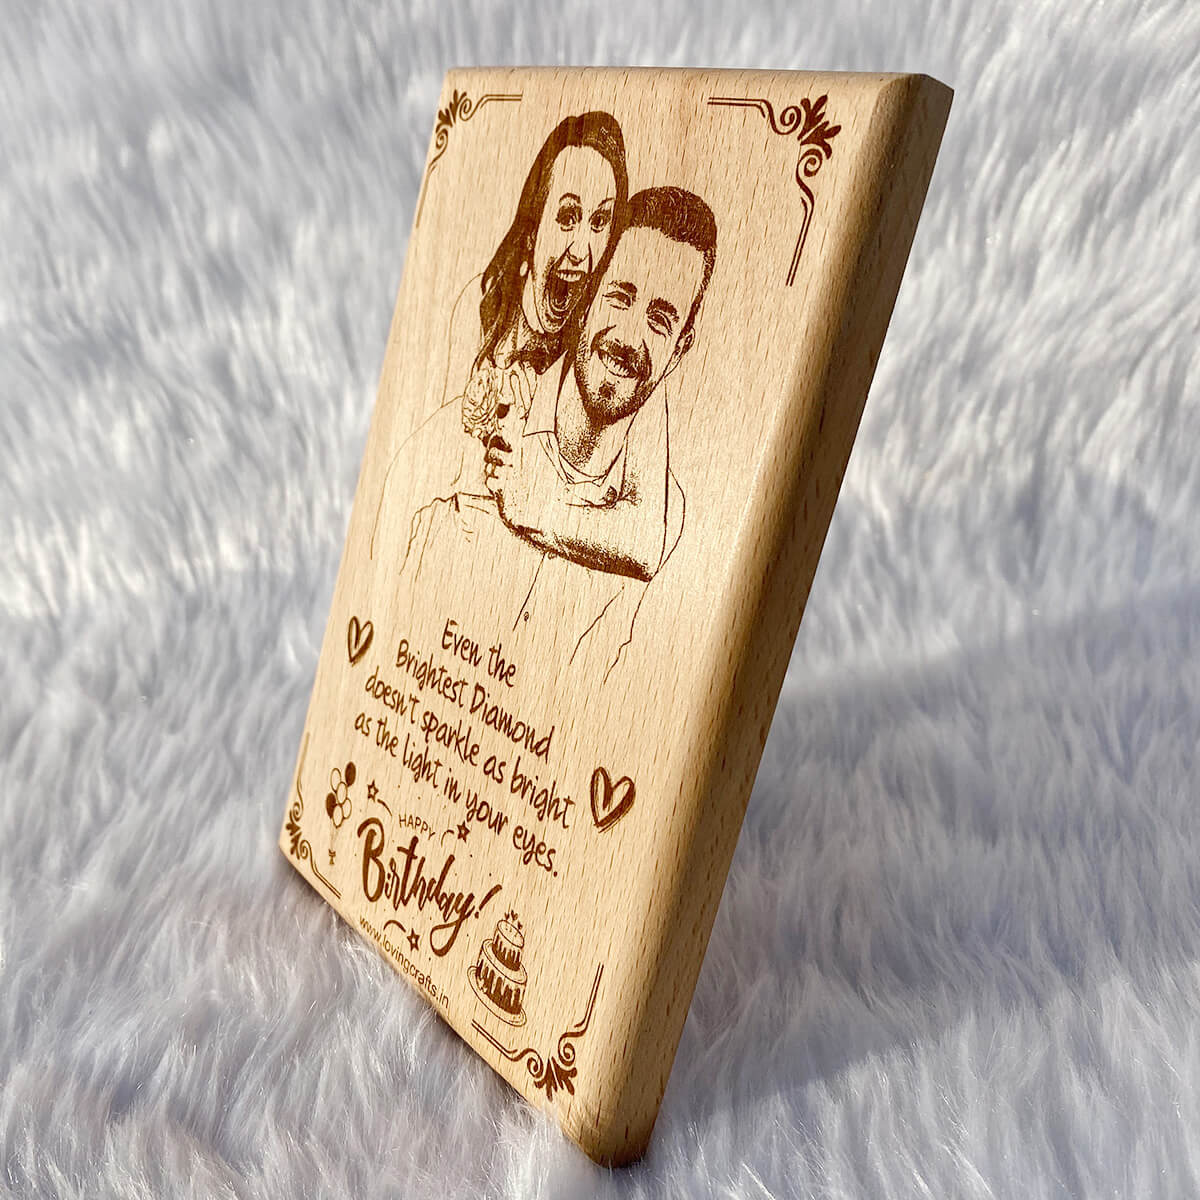 Personalised Wooden Engraved Photo Frame